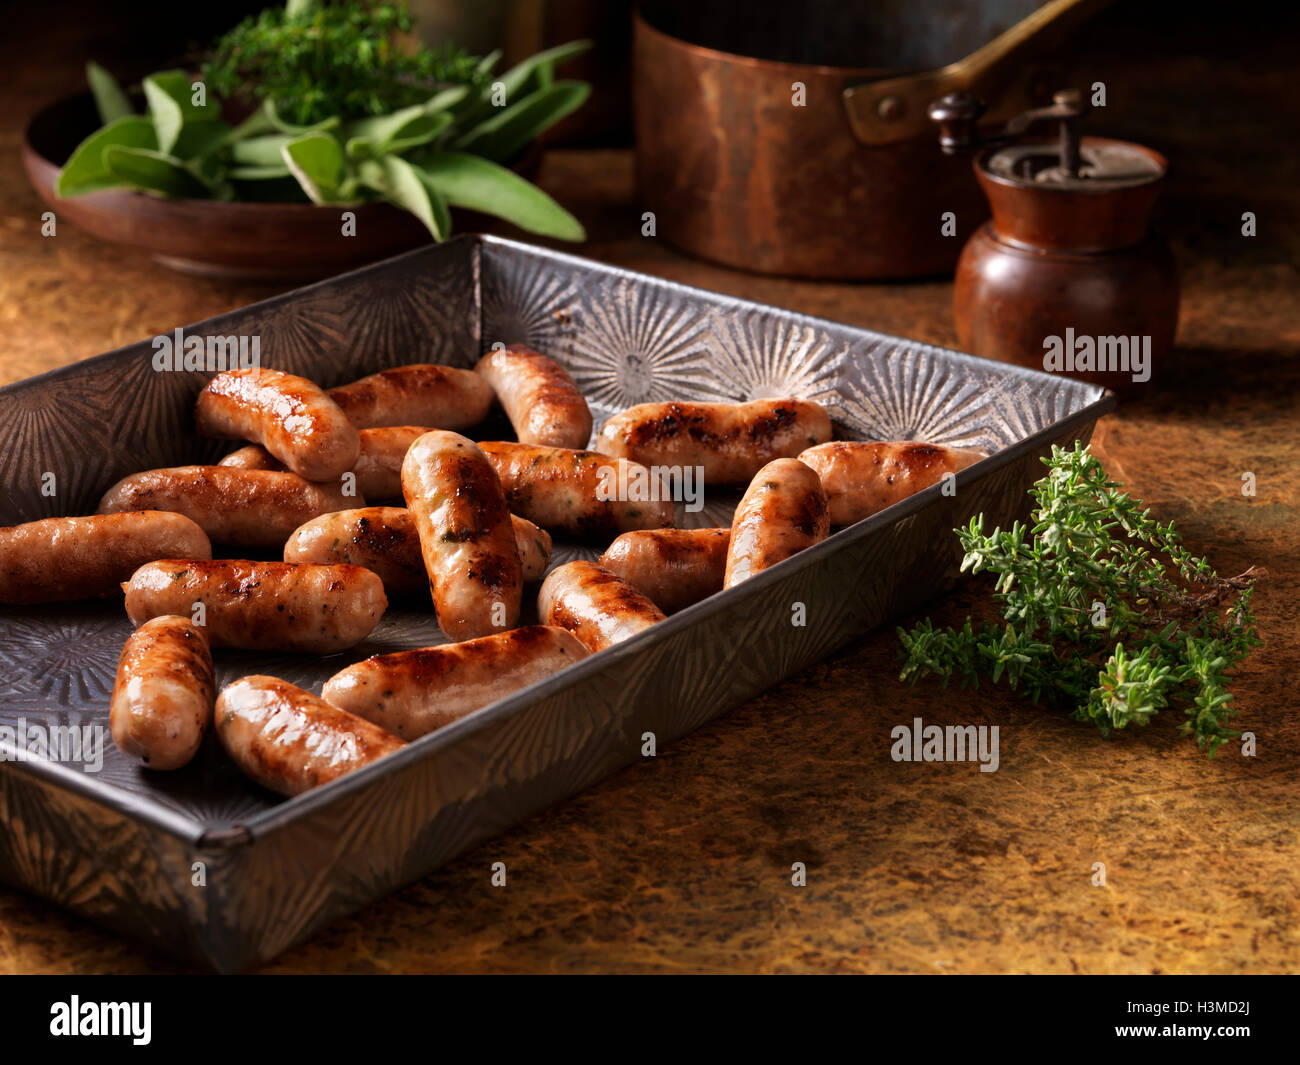 Christmas, celebration food, classic cocktail sausage selection, in baking tray, fresh thyme and sage Stock Photo